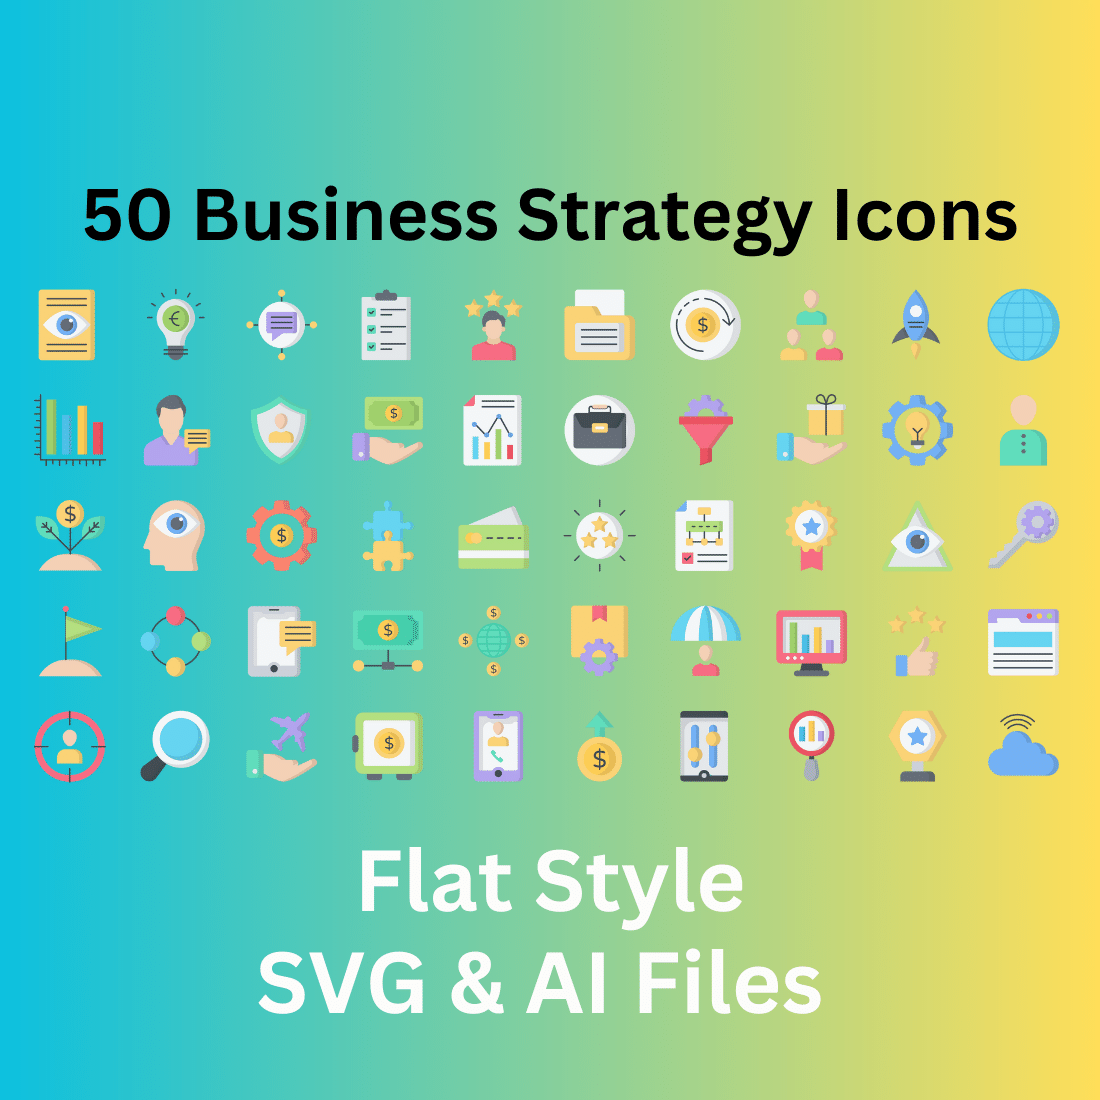 Business Strategy Set 50 Flat Icons - SVG And AI Files cover image.